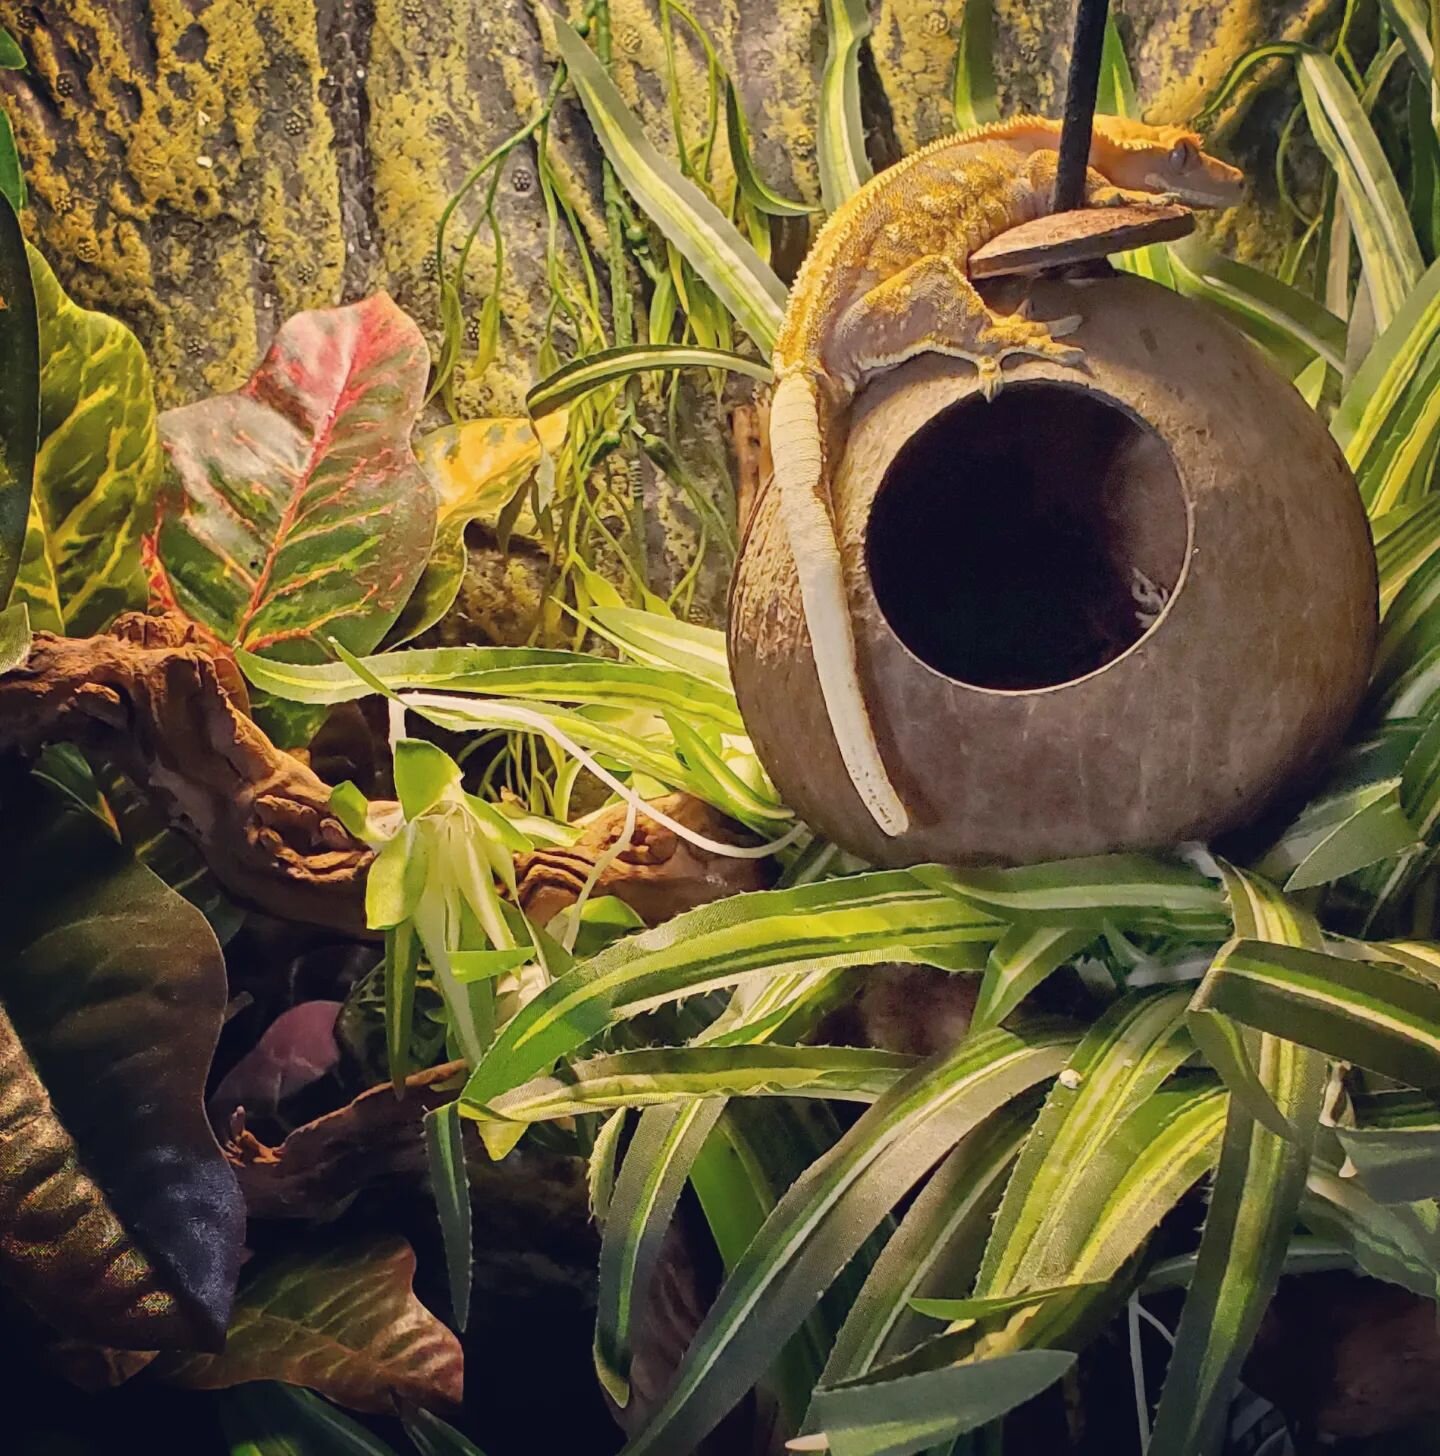 Crested geckos make fairly easy pets, and give you the opportunity to build beautiful bioactive enclosures in which they can thrive. 

Diablo is still available for adoption, visit our website for more details, centralvirginiareptilerescue.org (link 